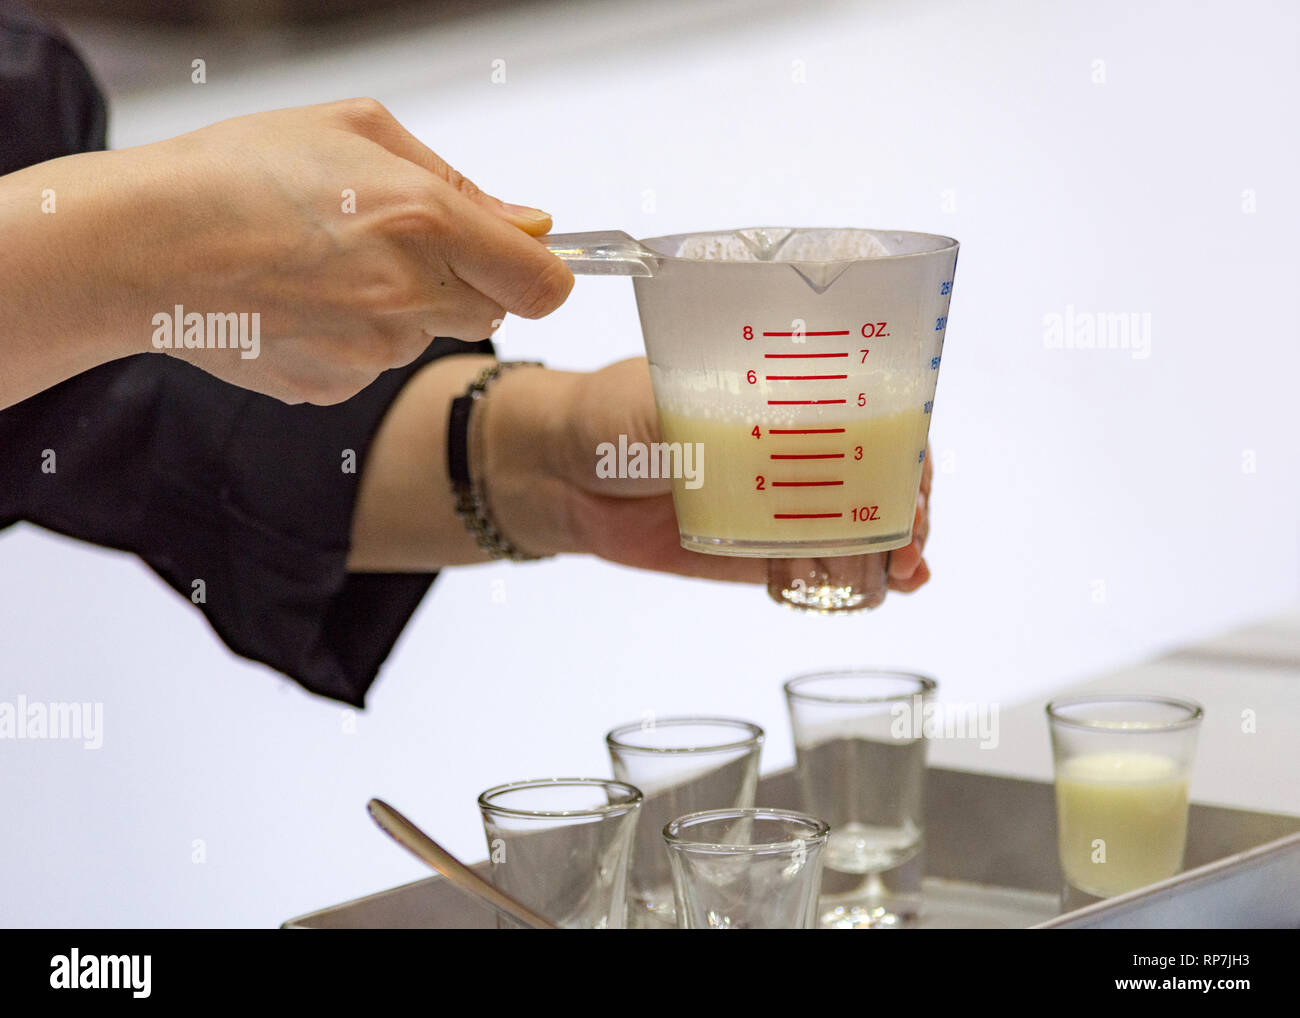 https://c8.alamy.com/comp/RP7JH3/measuring-out-milk-in-a-measuring-jug-for-cooking-or-test-RP7JH3.jpg